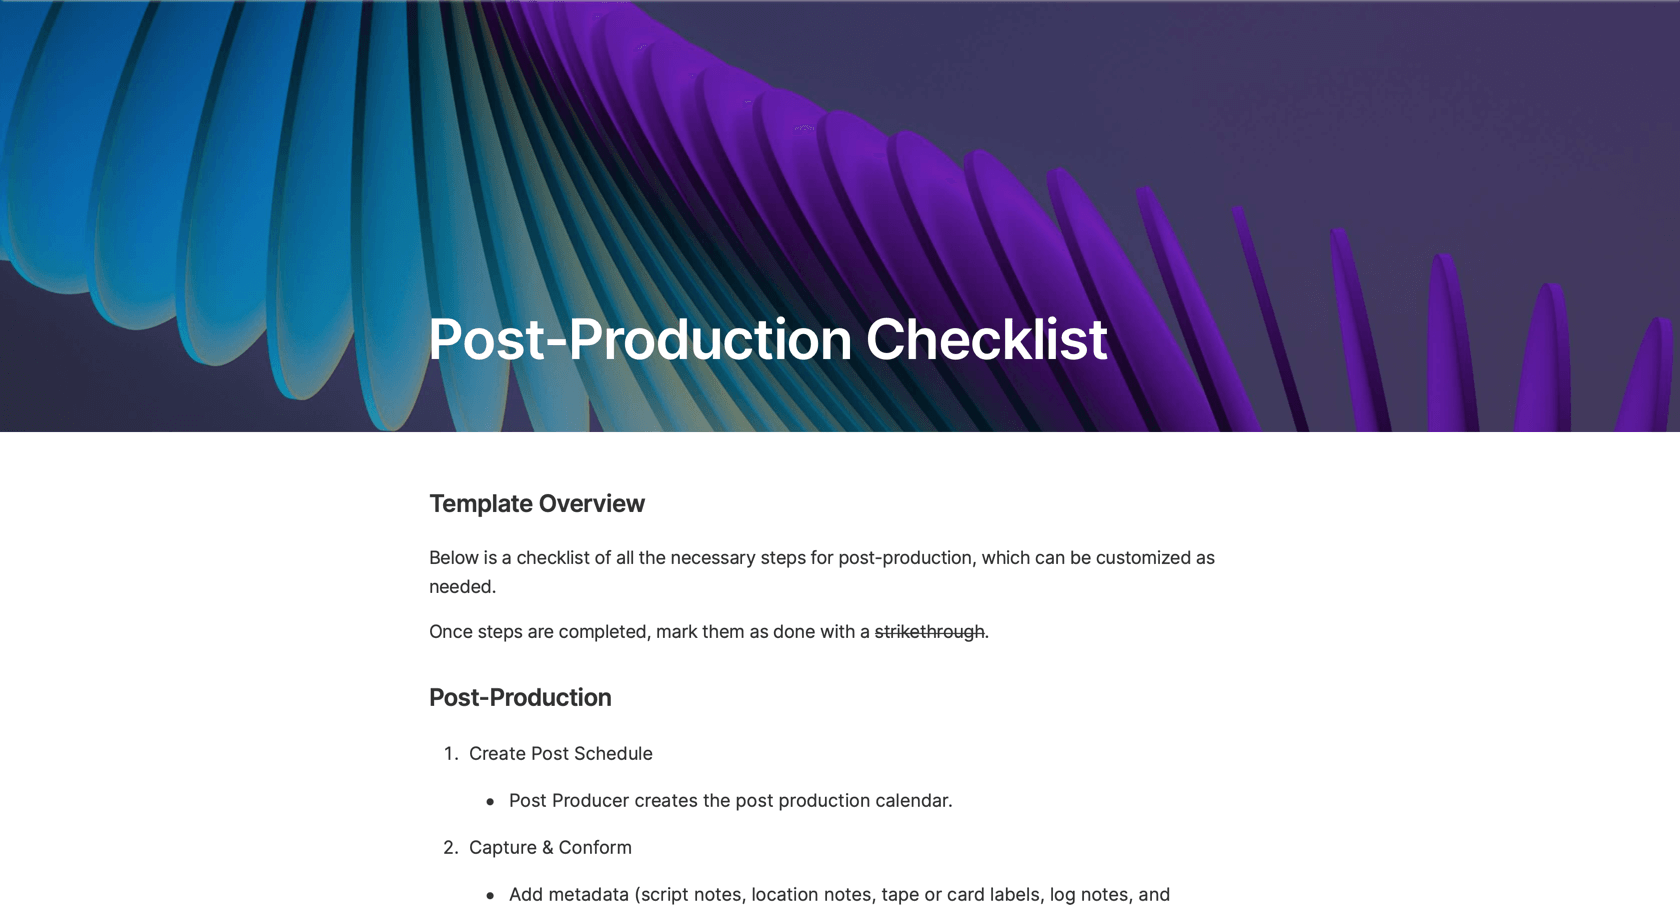 https://3389140.fs1.hubspotusercontent-na1.net/hubfs/3389140/Post%20Production%20Checklist%20Template.png